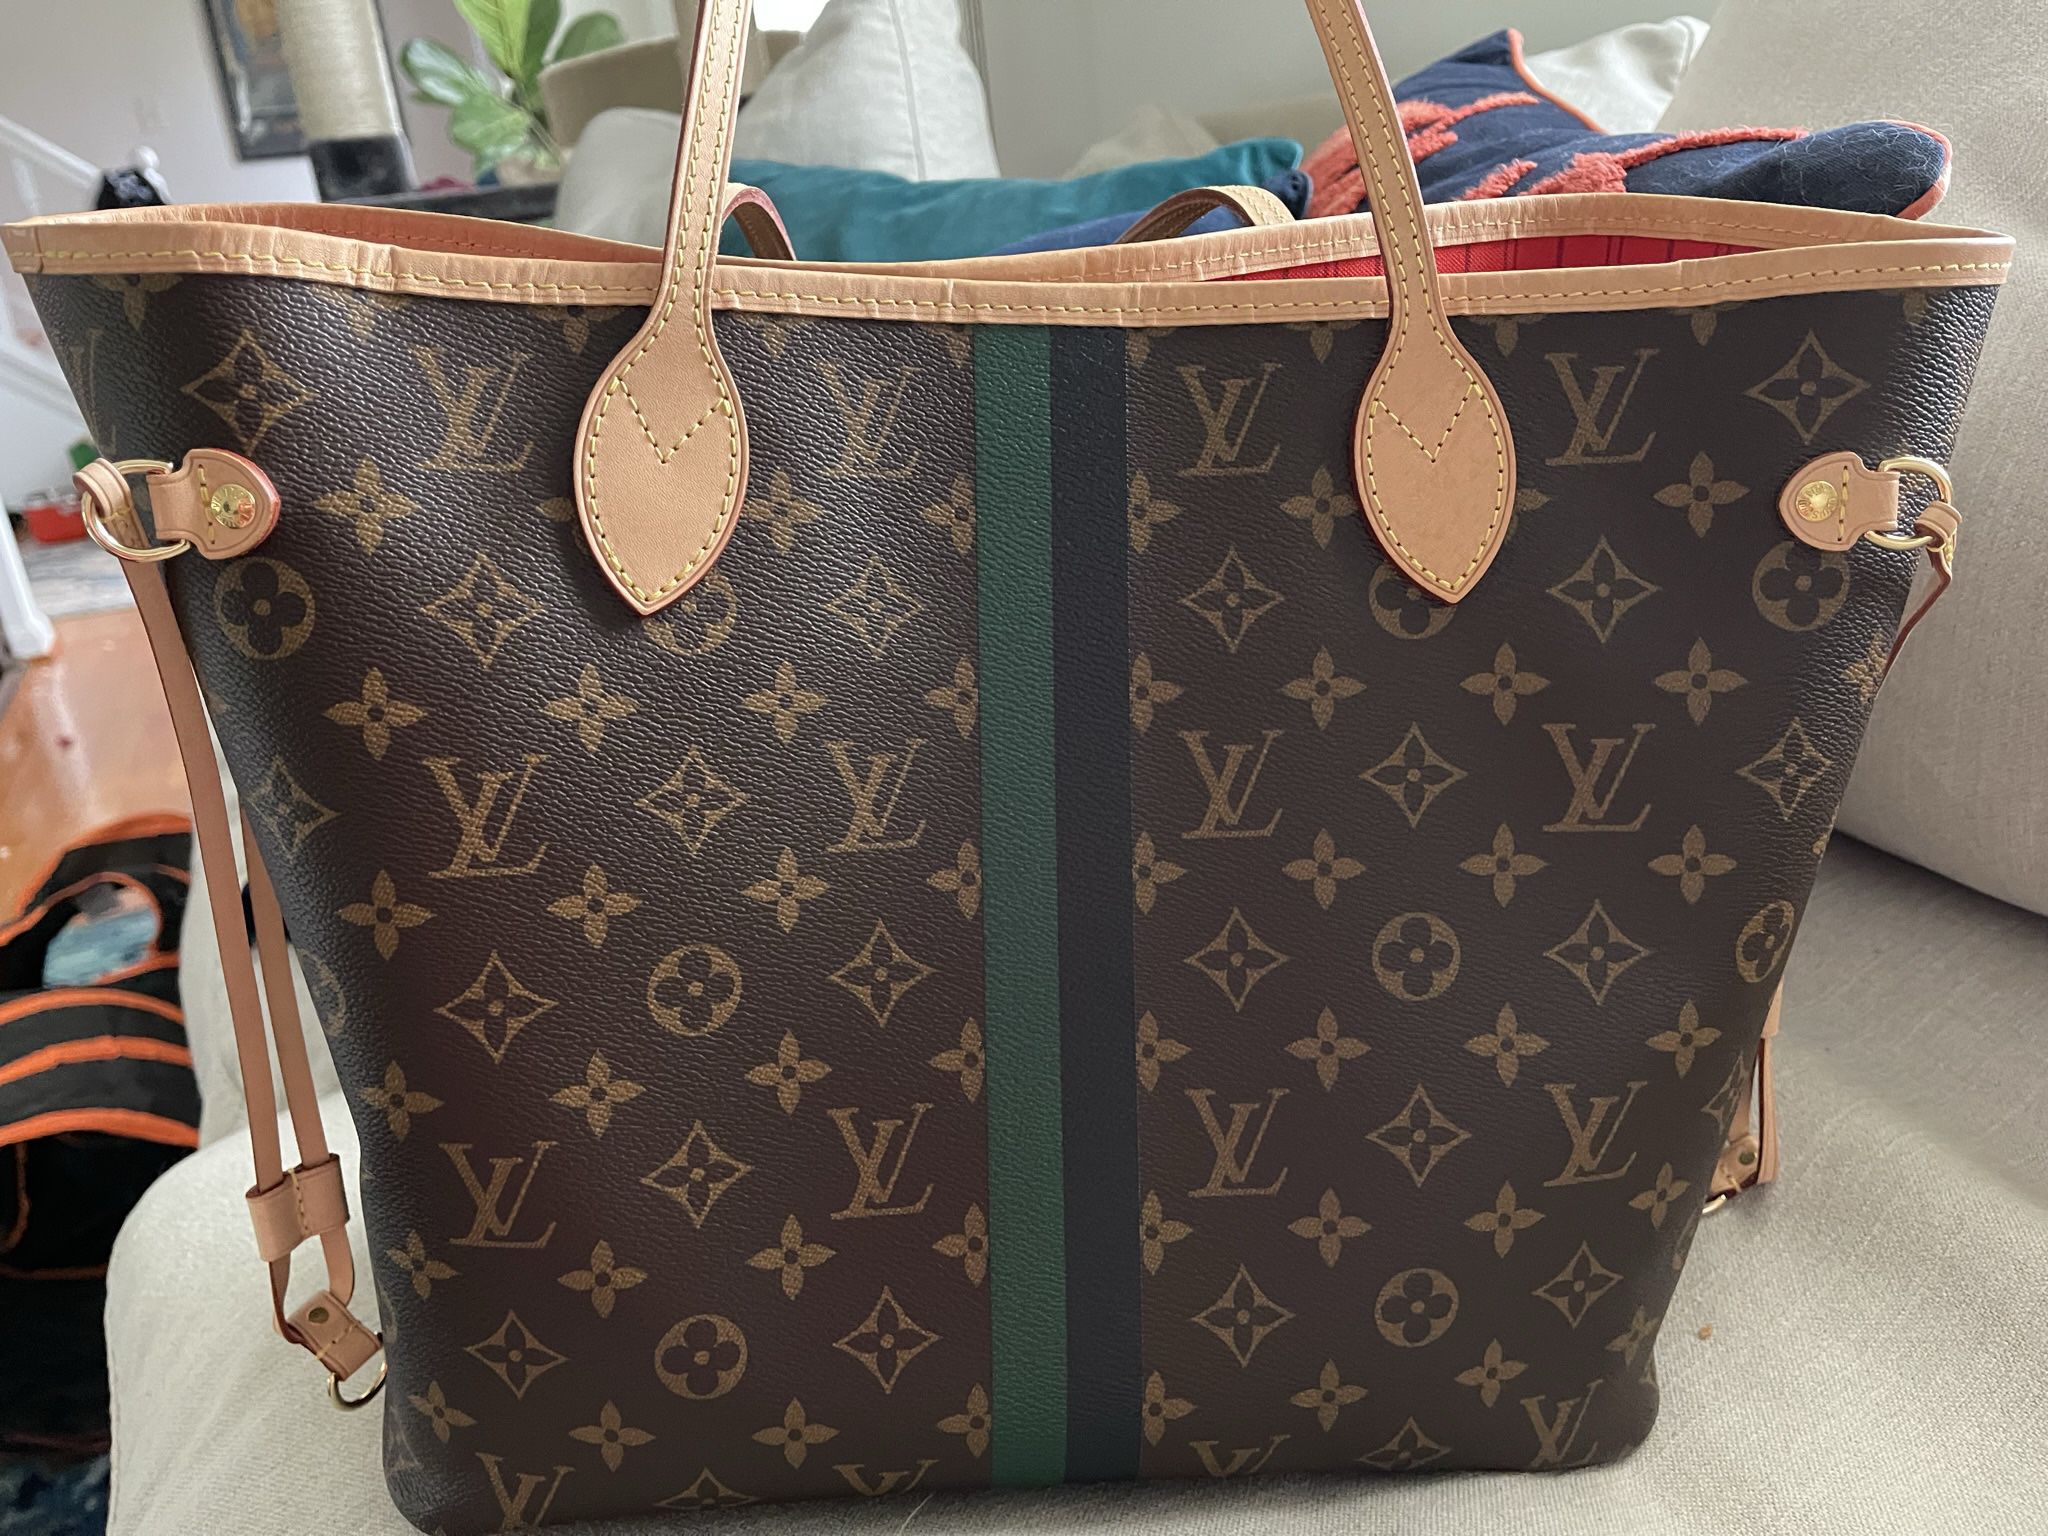 Authentic Louis Vuitton Neverfull MM